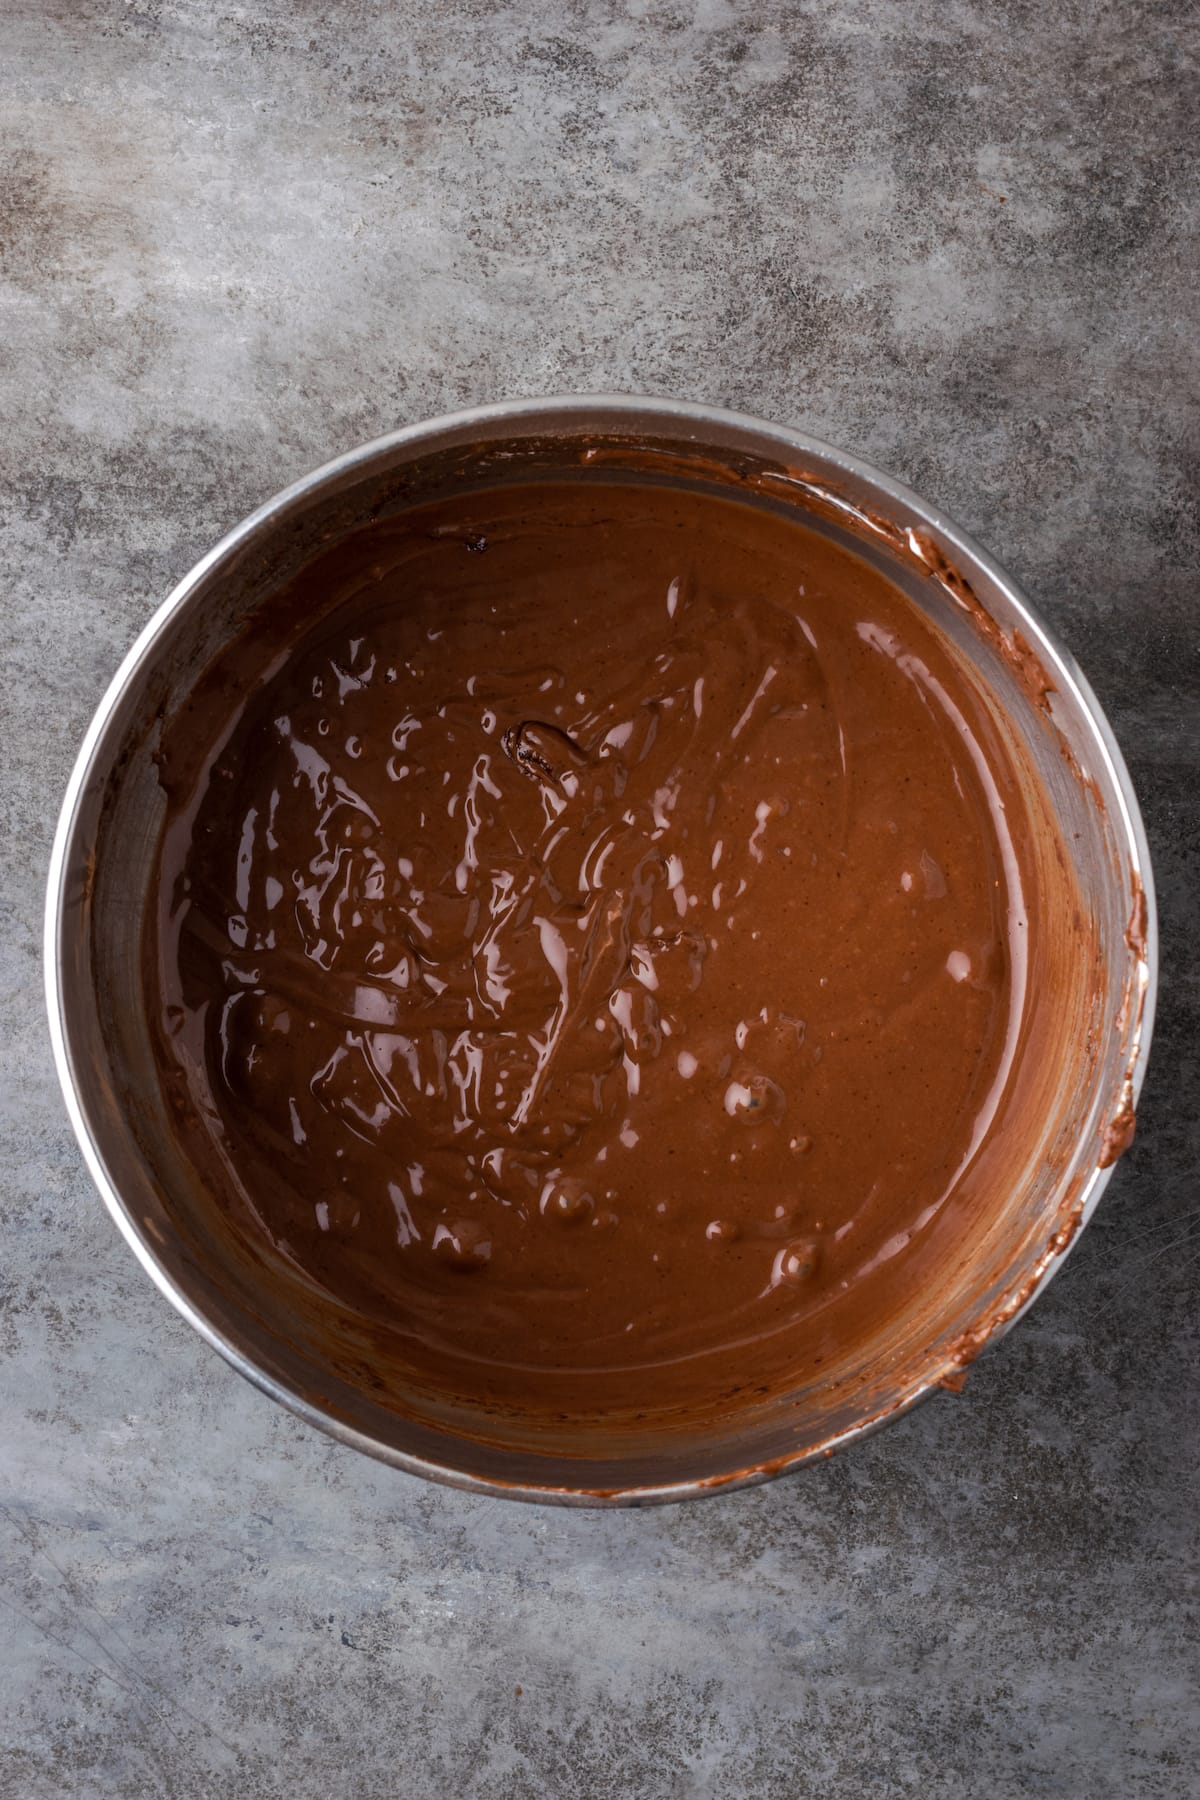 Chocolate cake batter in a metal mixing bowl.